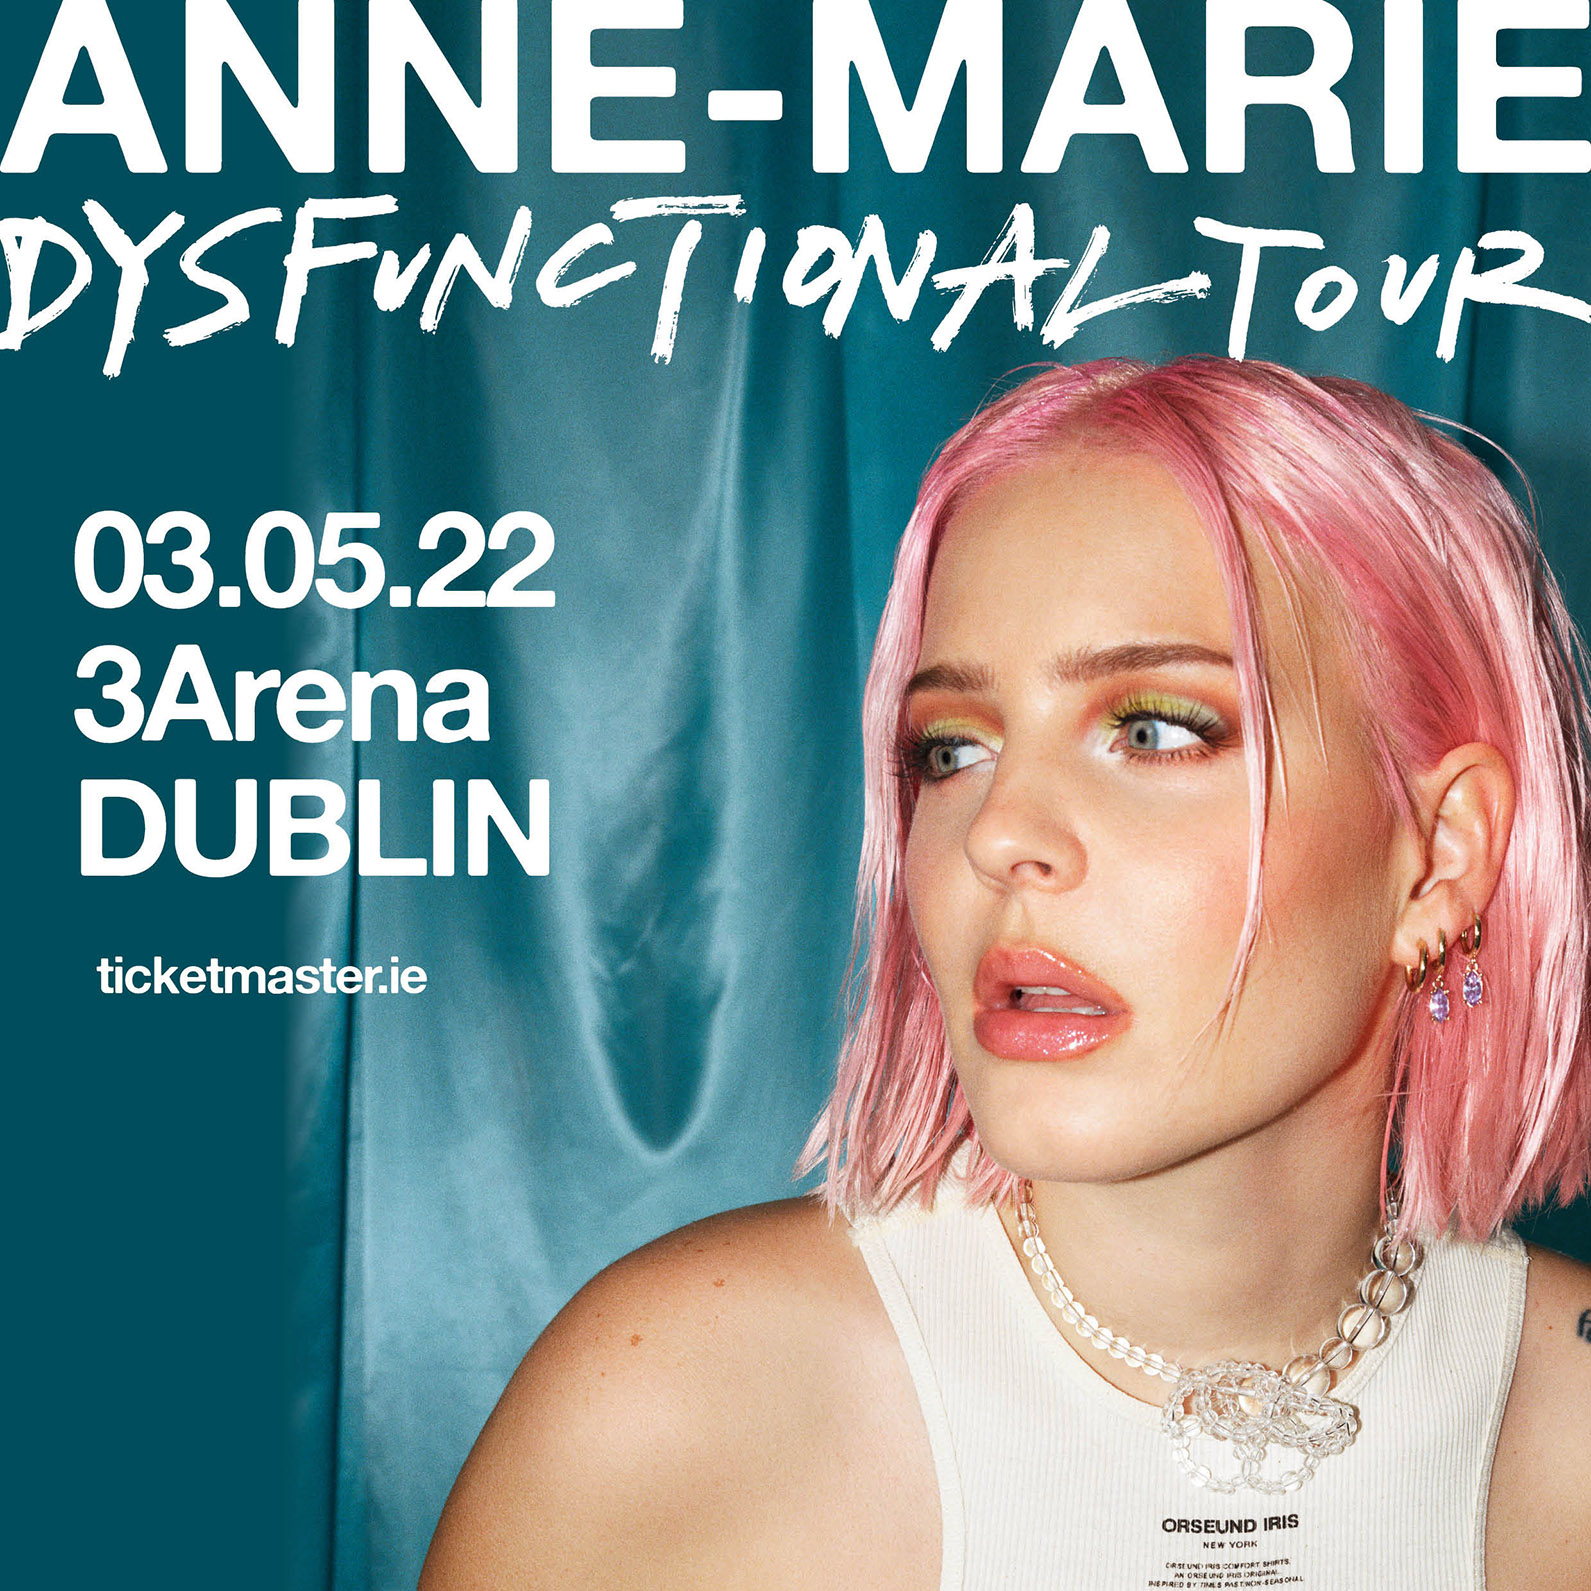 ANNE-MARIE brings her ‘Dysfunctional Tour’ to Dublin’s 3Arena on May 3rd 2022 